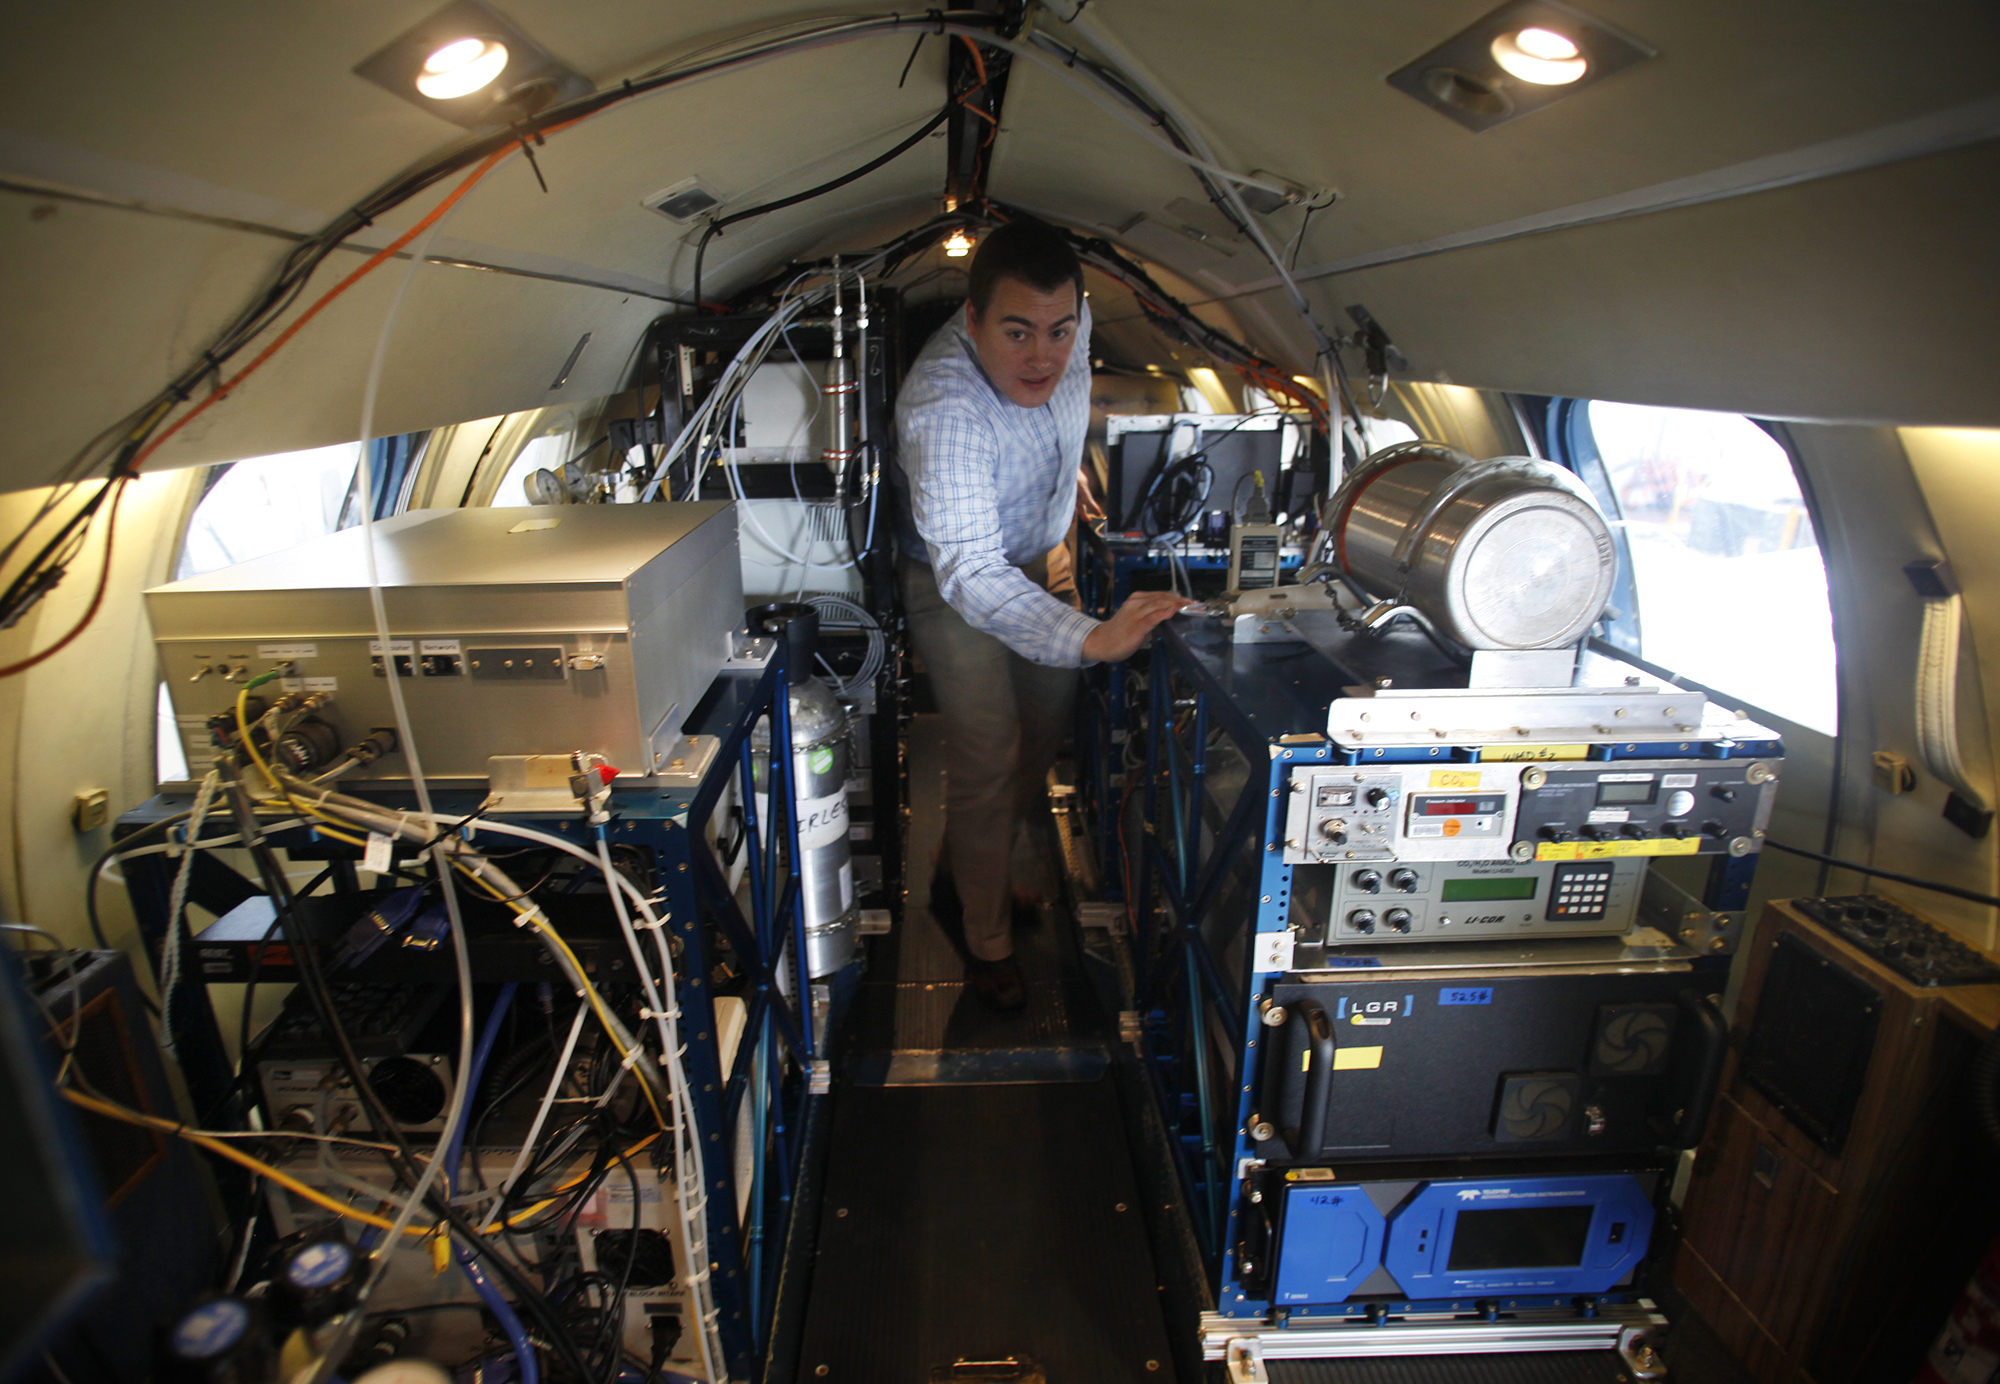 Dr. Rich Moore walks down the aisle of a research plane filled with scientific instruments.